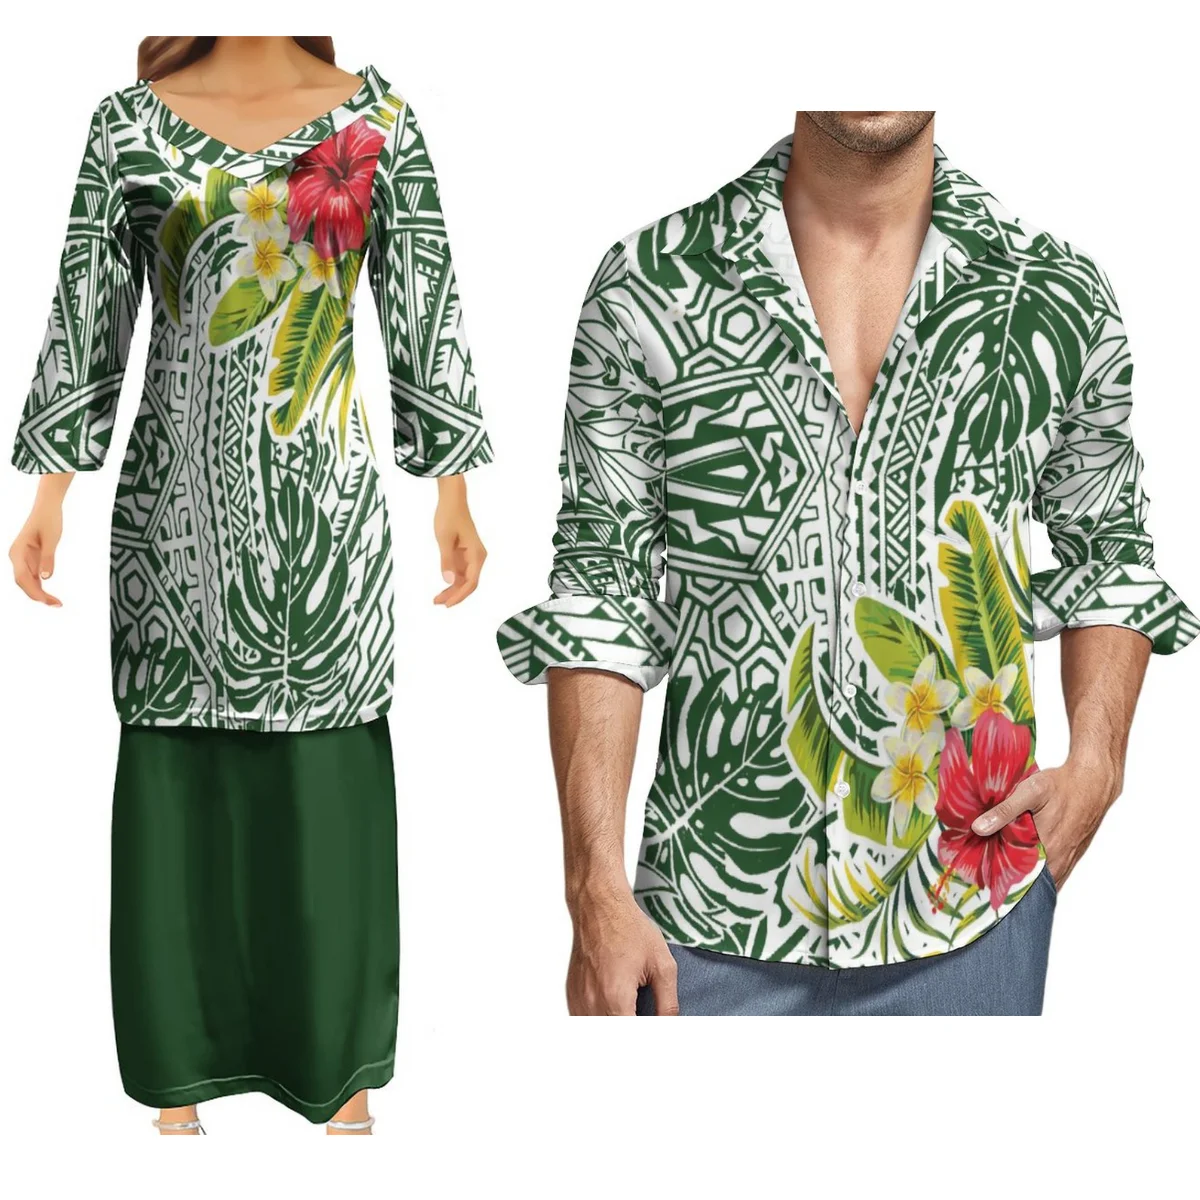 

Support Your Design With Women'S Long Sleeve Dress Pletasi Dress And Men'S Long Sleeve Shirt Polynesian Tribe Couple Suit